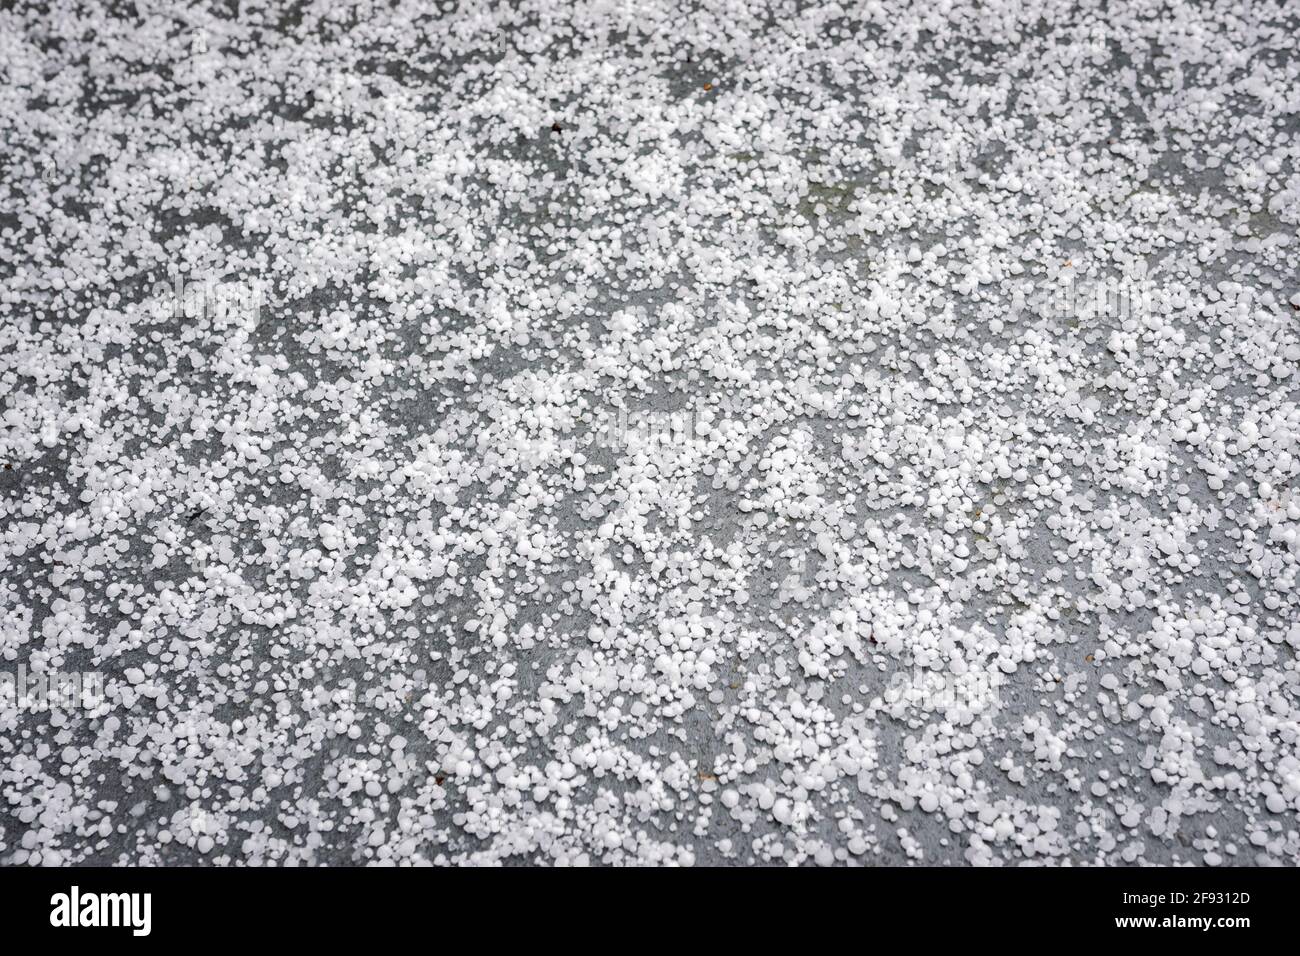 Hailstones on the ground after a wintry shower Stock Photo